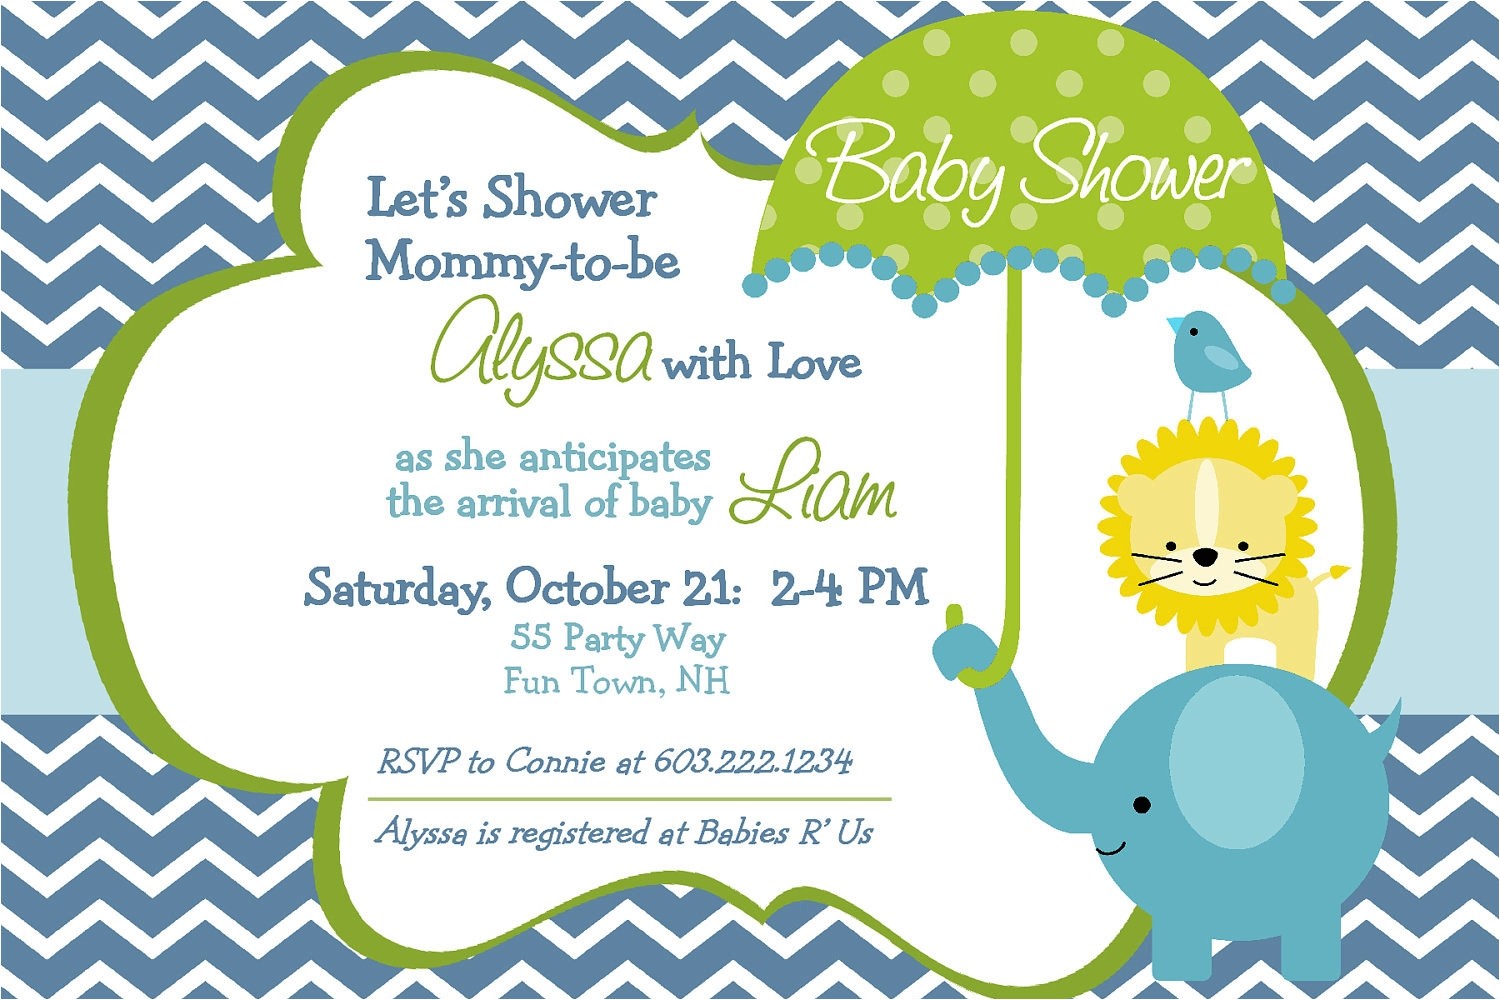 Baby Shower Invitations Layouts Baby Shower Invitations Templates Editable